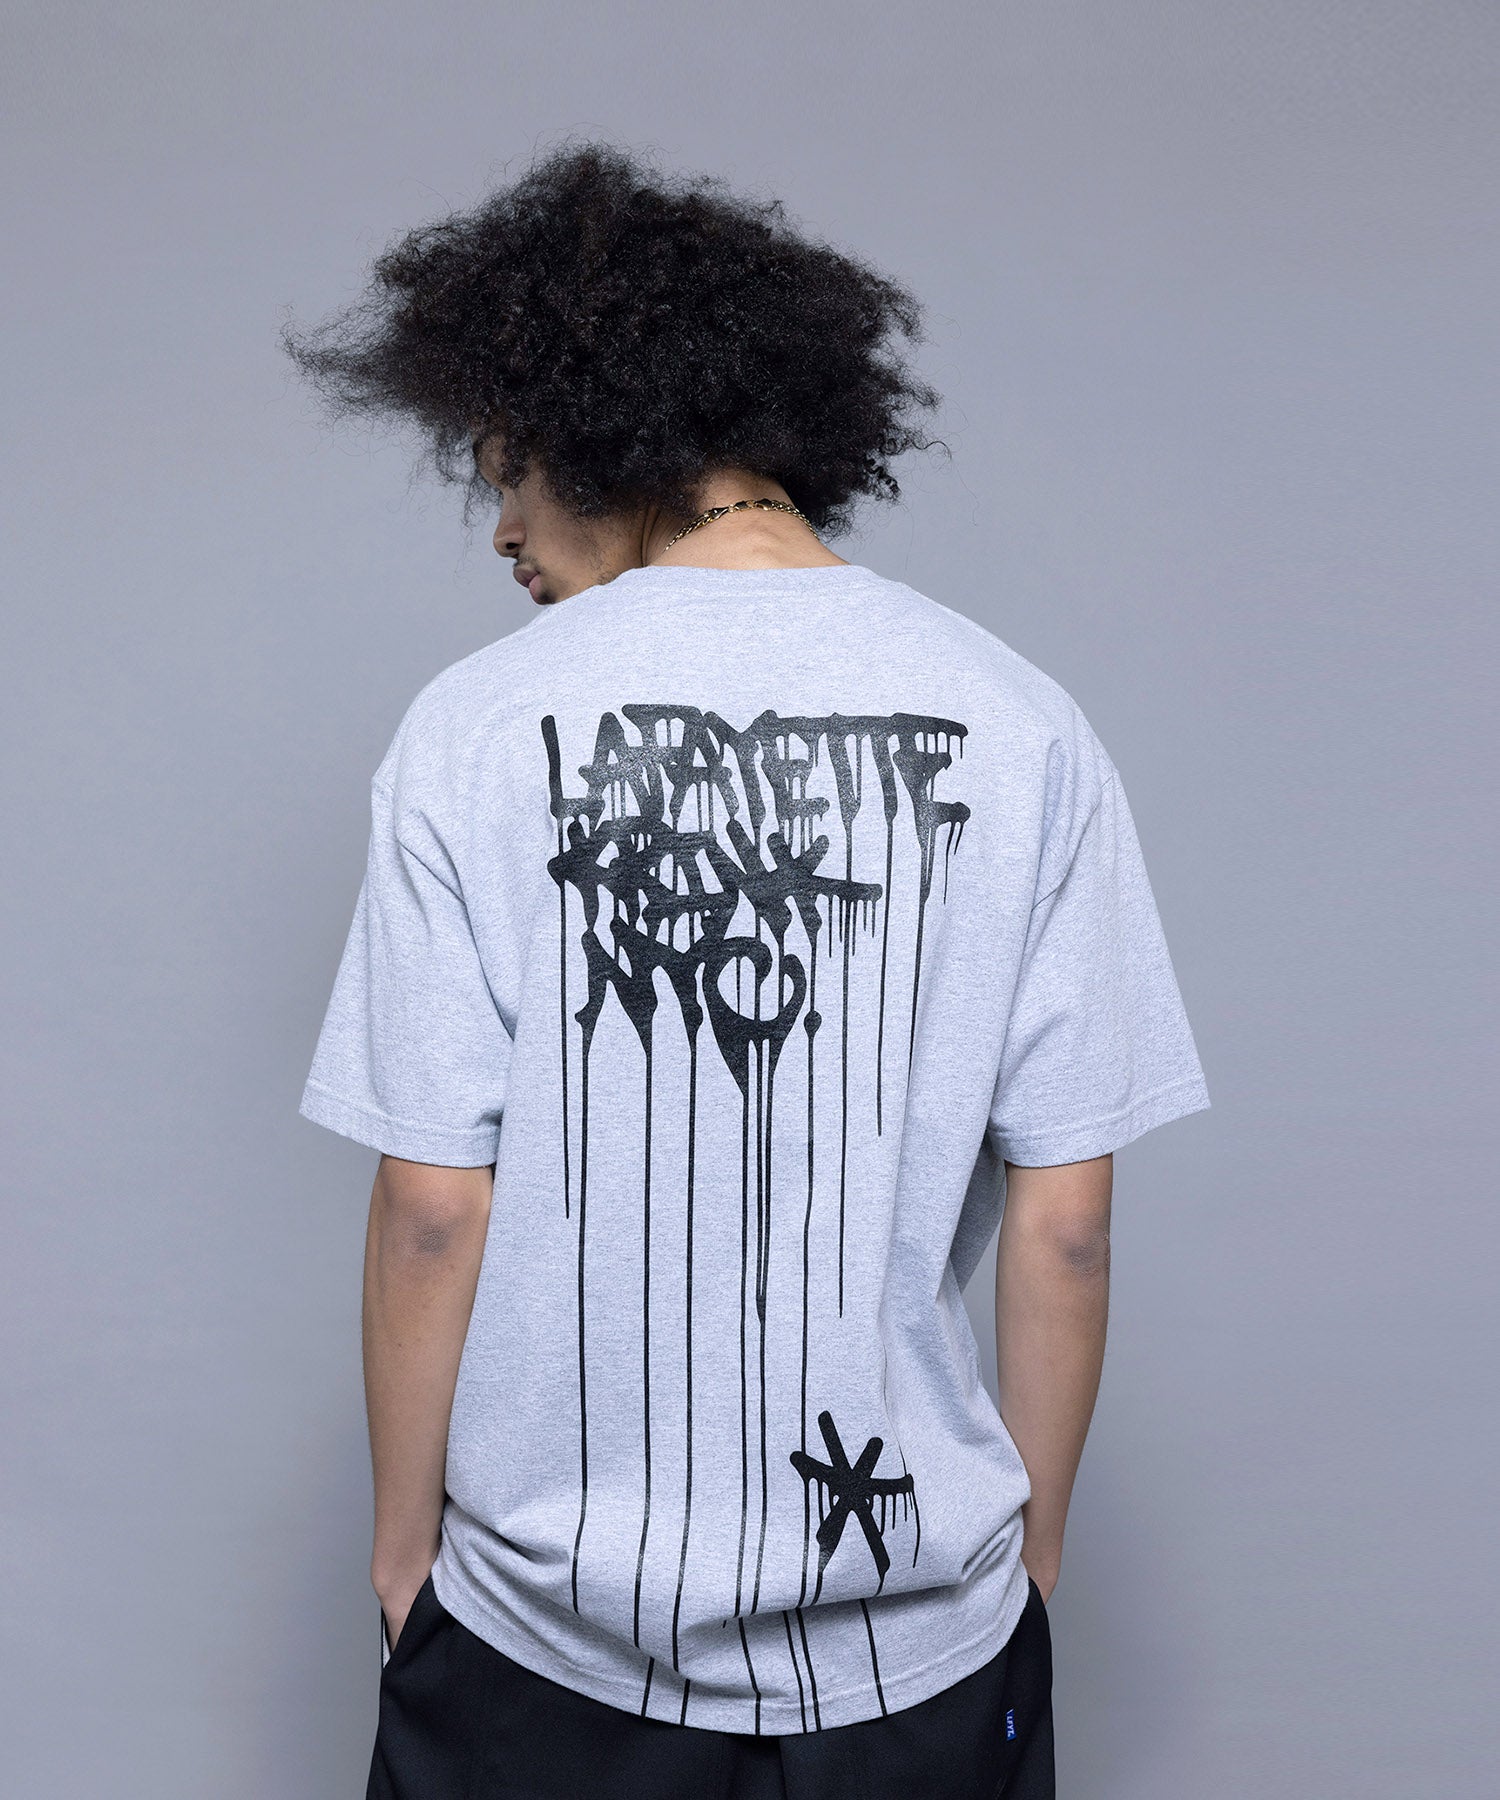 LFYT × KRINK TAGGING TEE LS220124 HEATHER GRAY